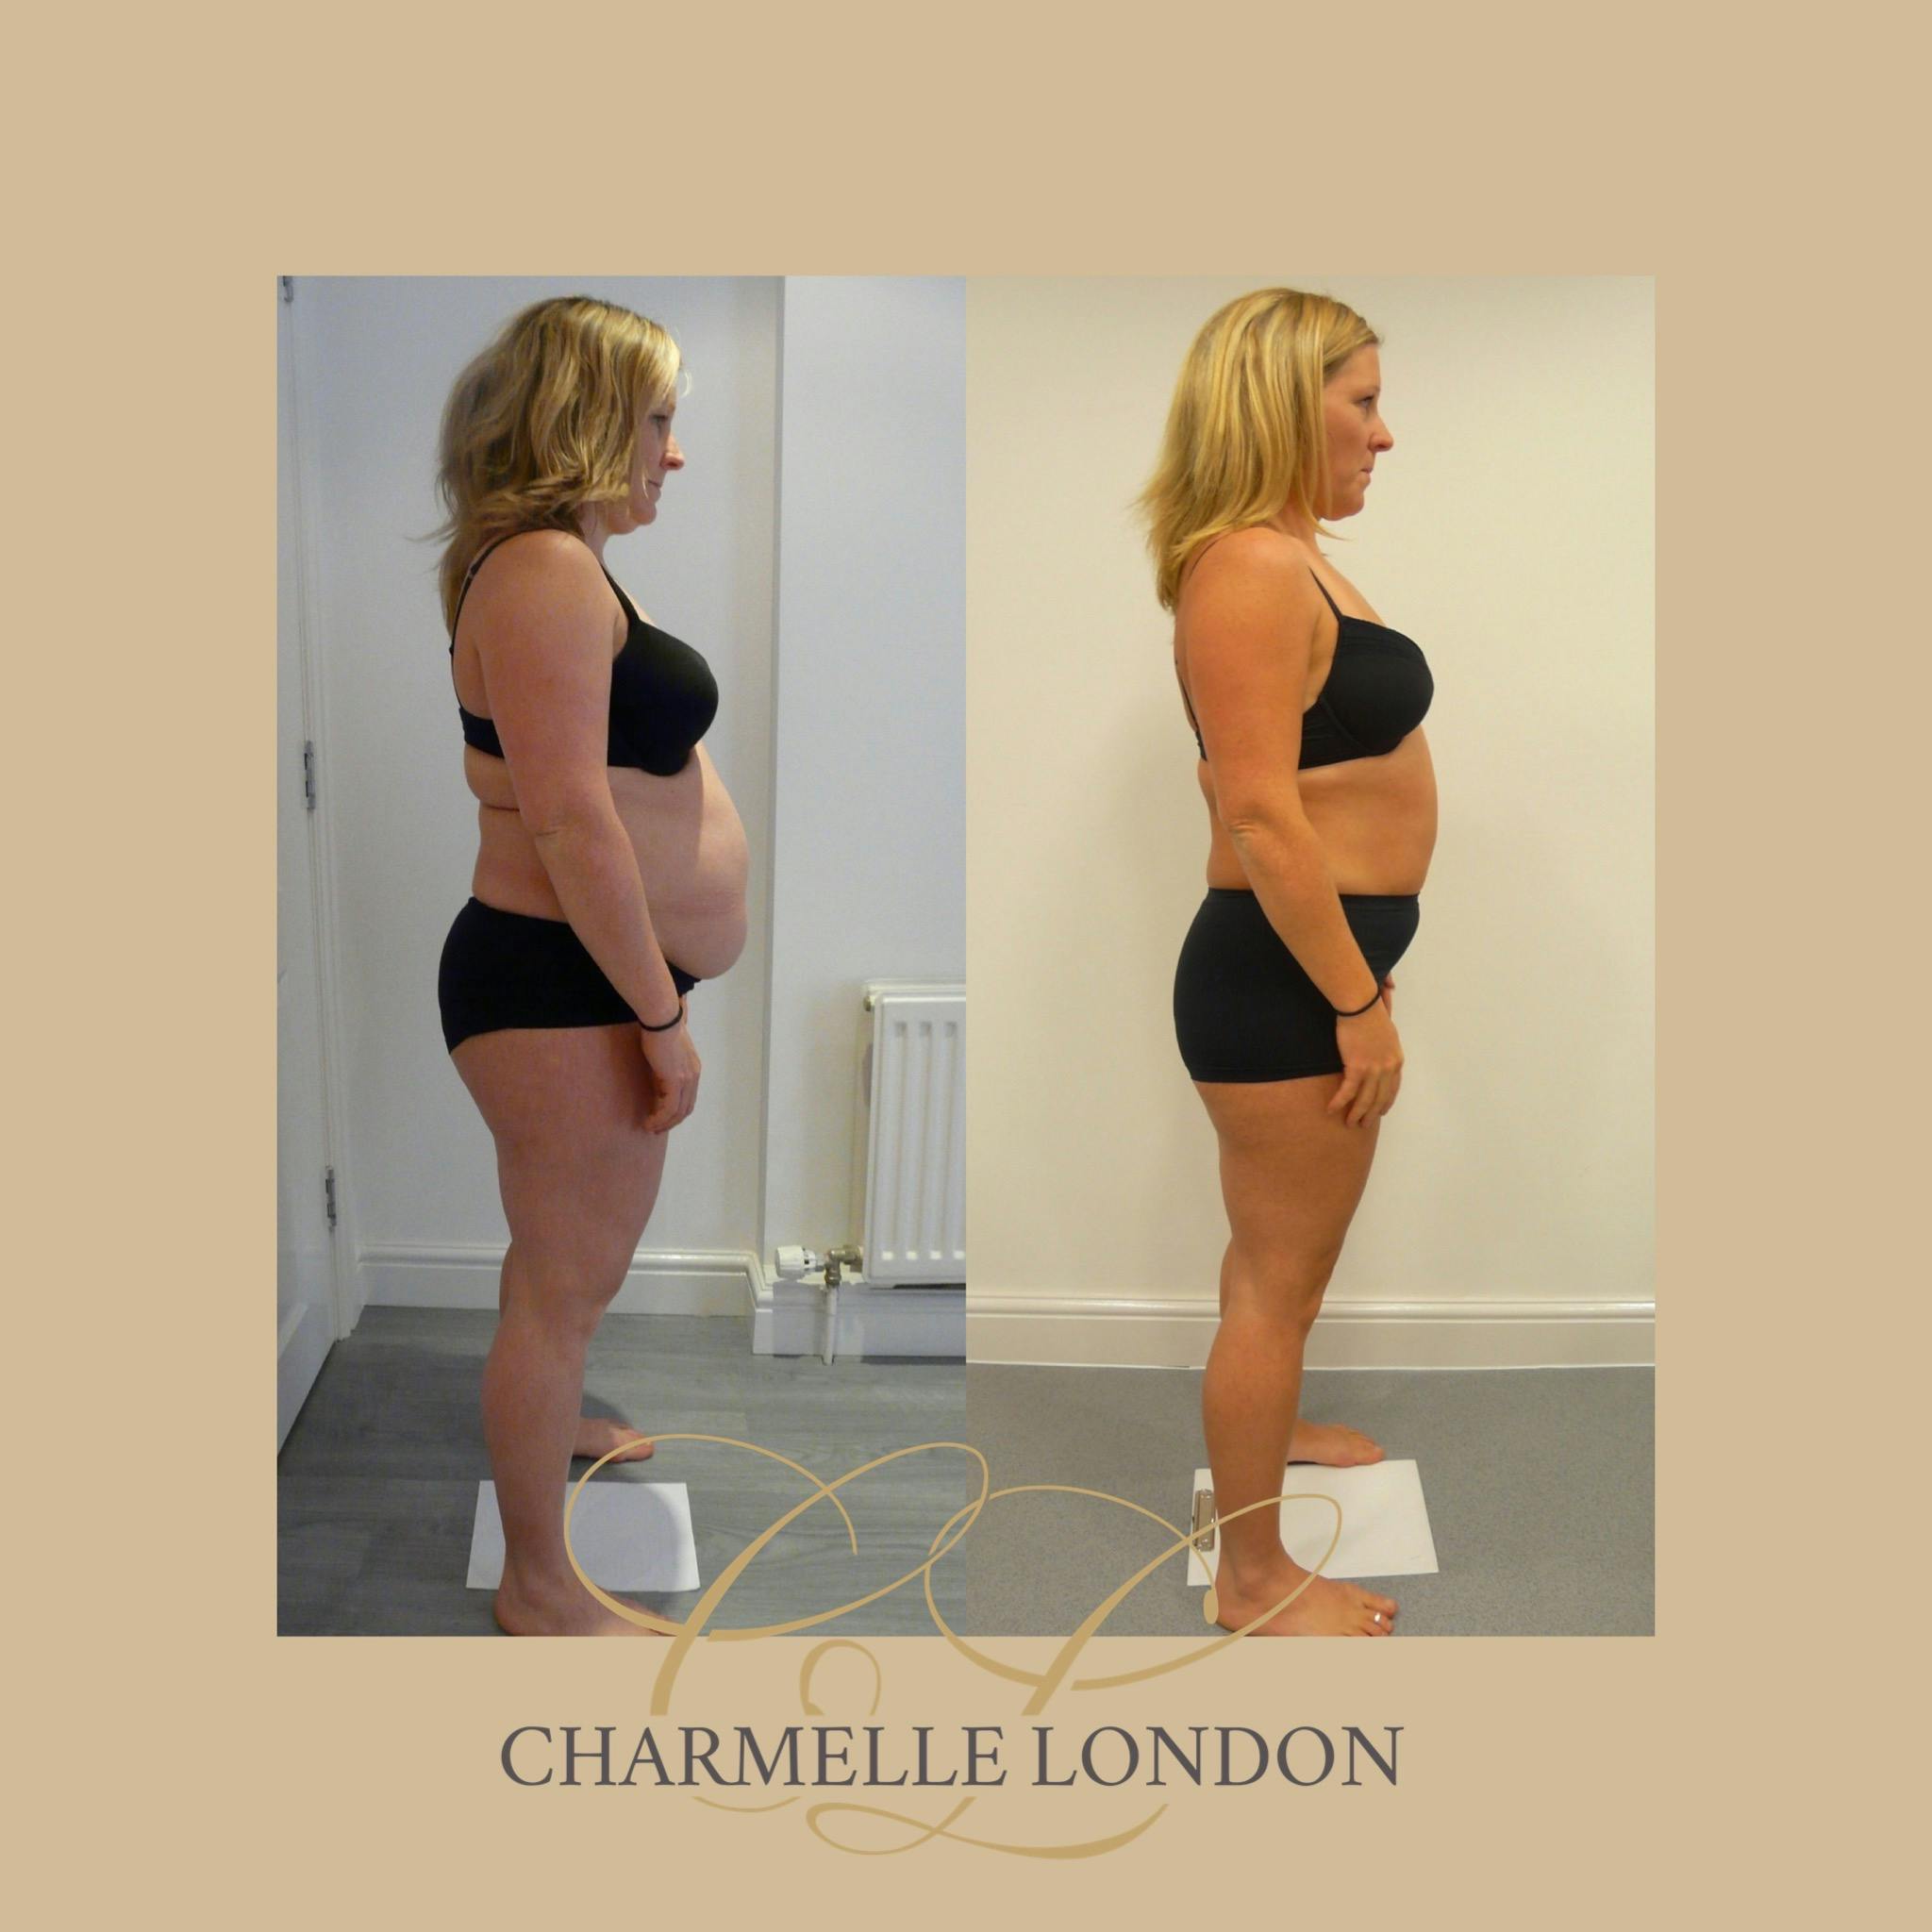 3D Bespoke Concentrated Non Surgical Fat Removal Expert treatment which involves an individual or combined bespoke treatment using 3D-Cavitation, 3D-Radio Frequency and/or 3D-Shockwave. This creates a complete, effective and safe choice for fat reduction. Call 0333 016 3500.